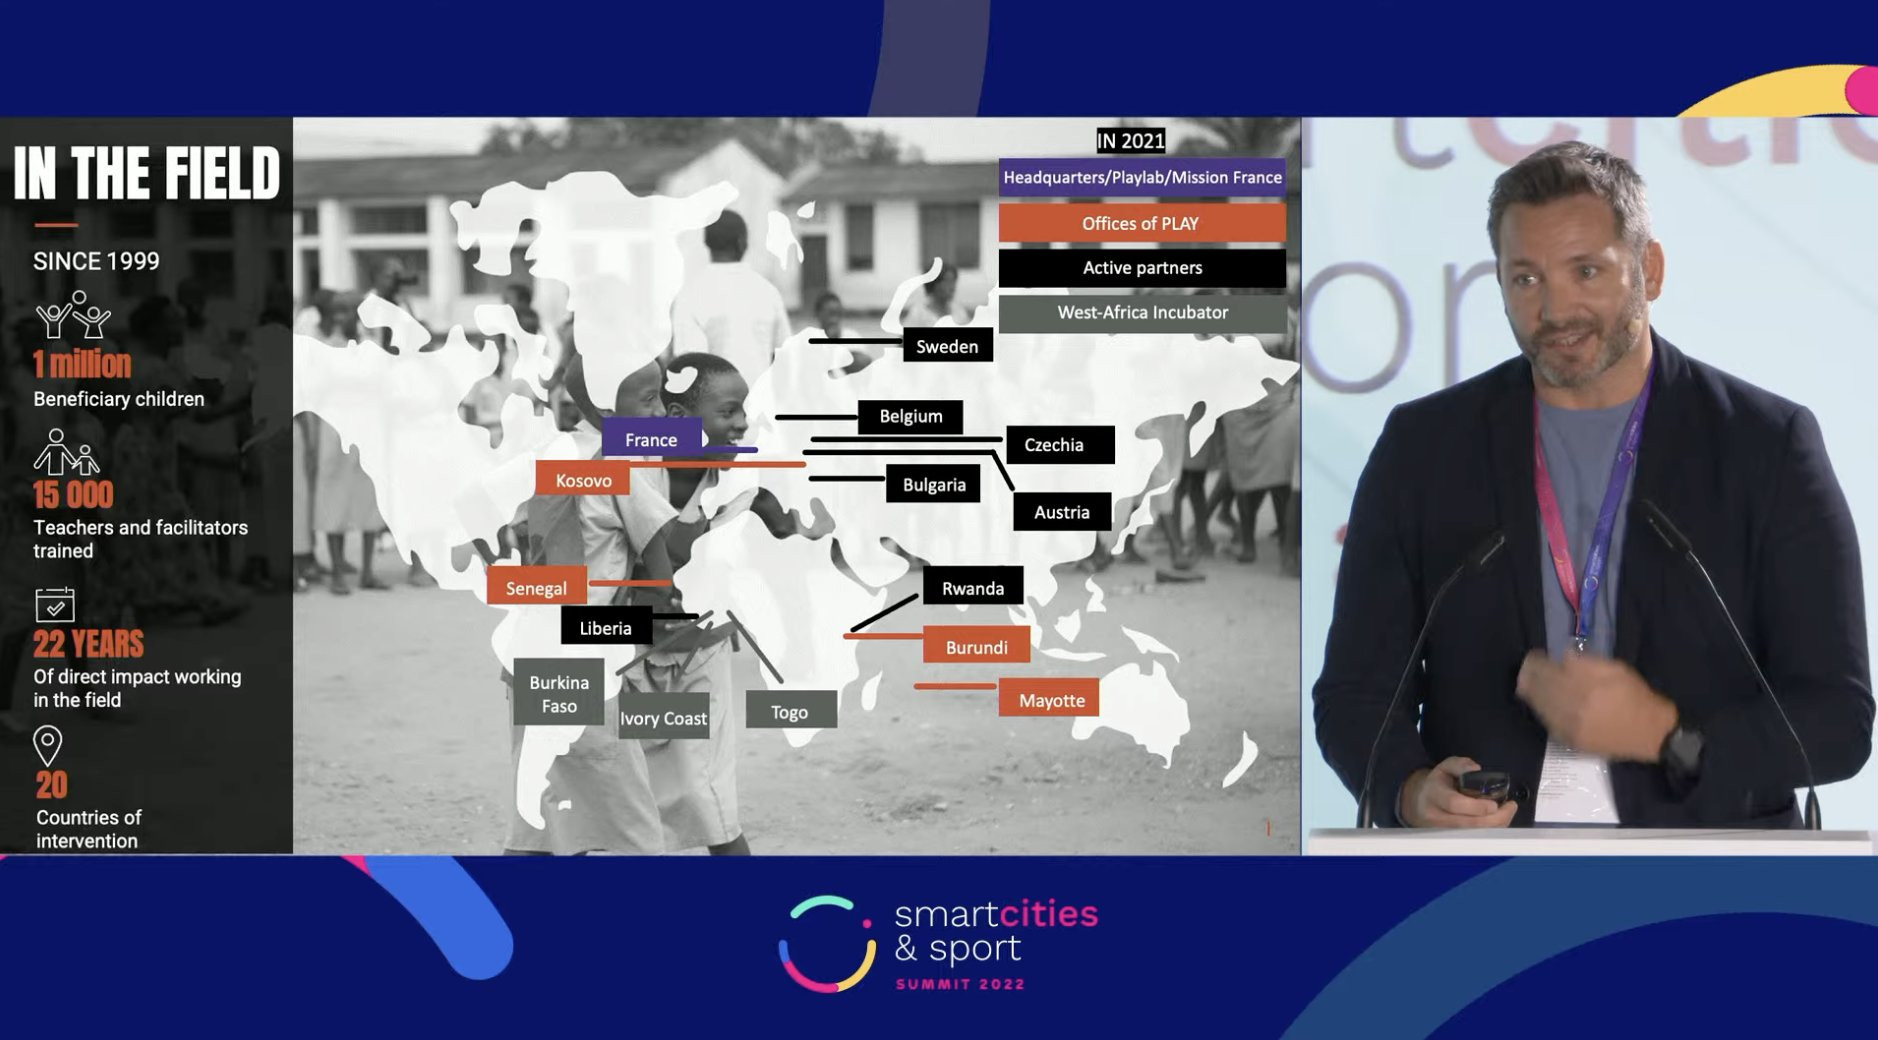 insidethegames is reporting LIVE from the smartcities & sport summit in Lausanne